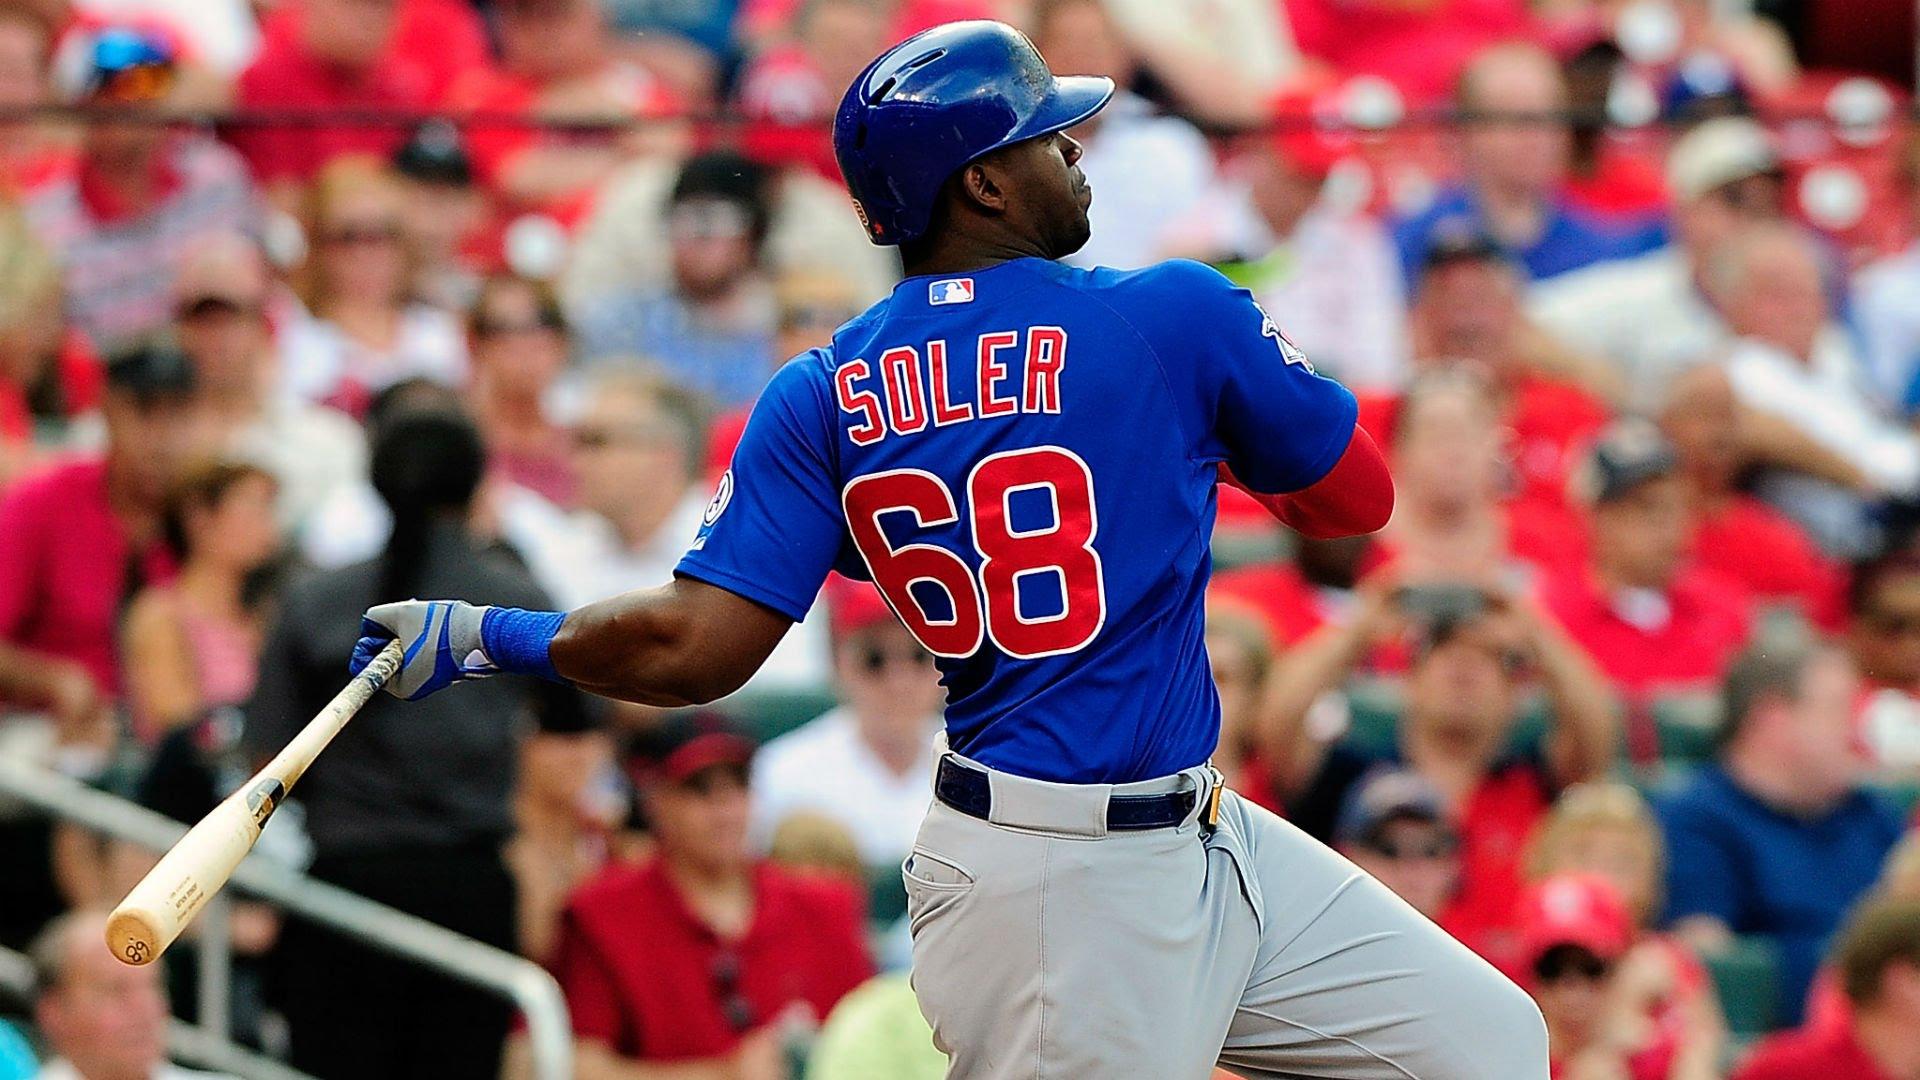 Royally Yours: Jorge Soler Profile